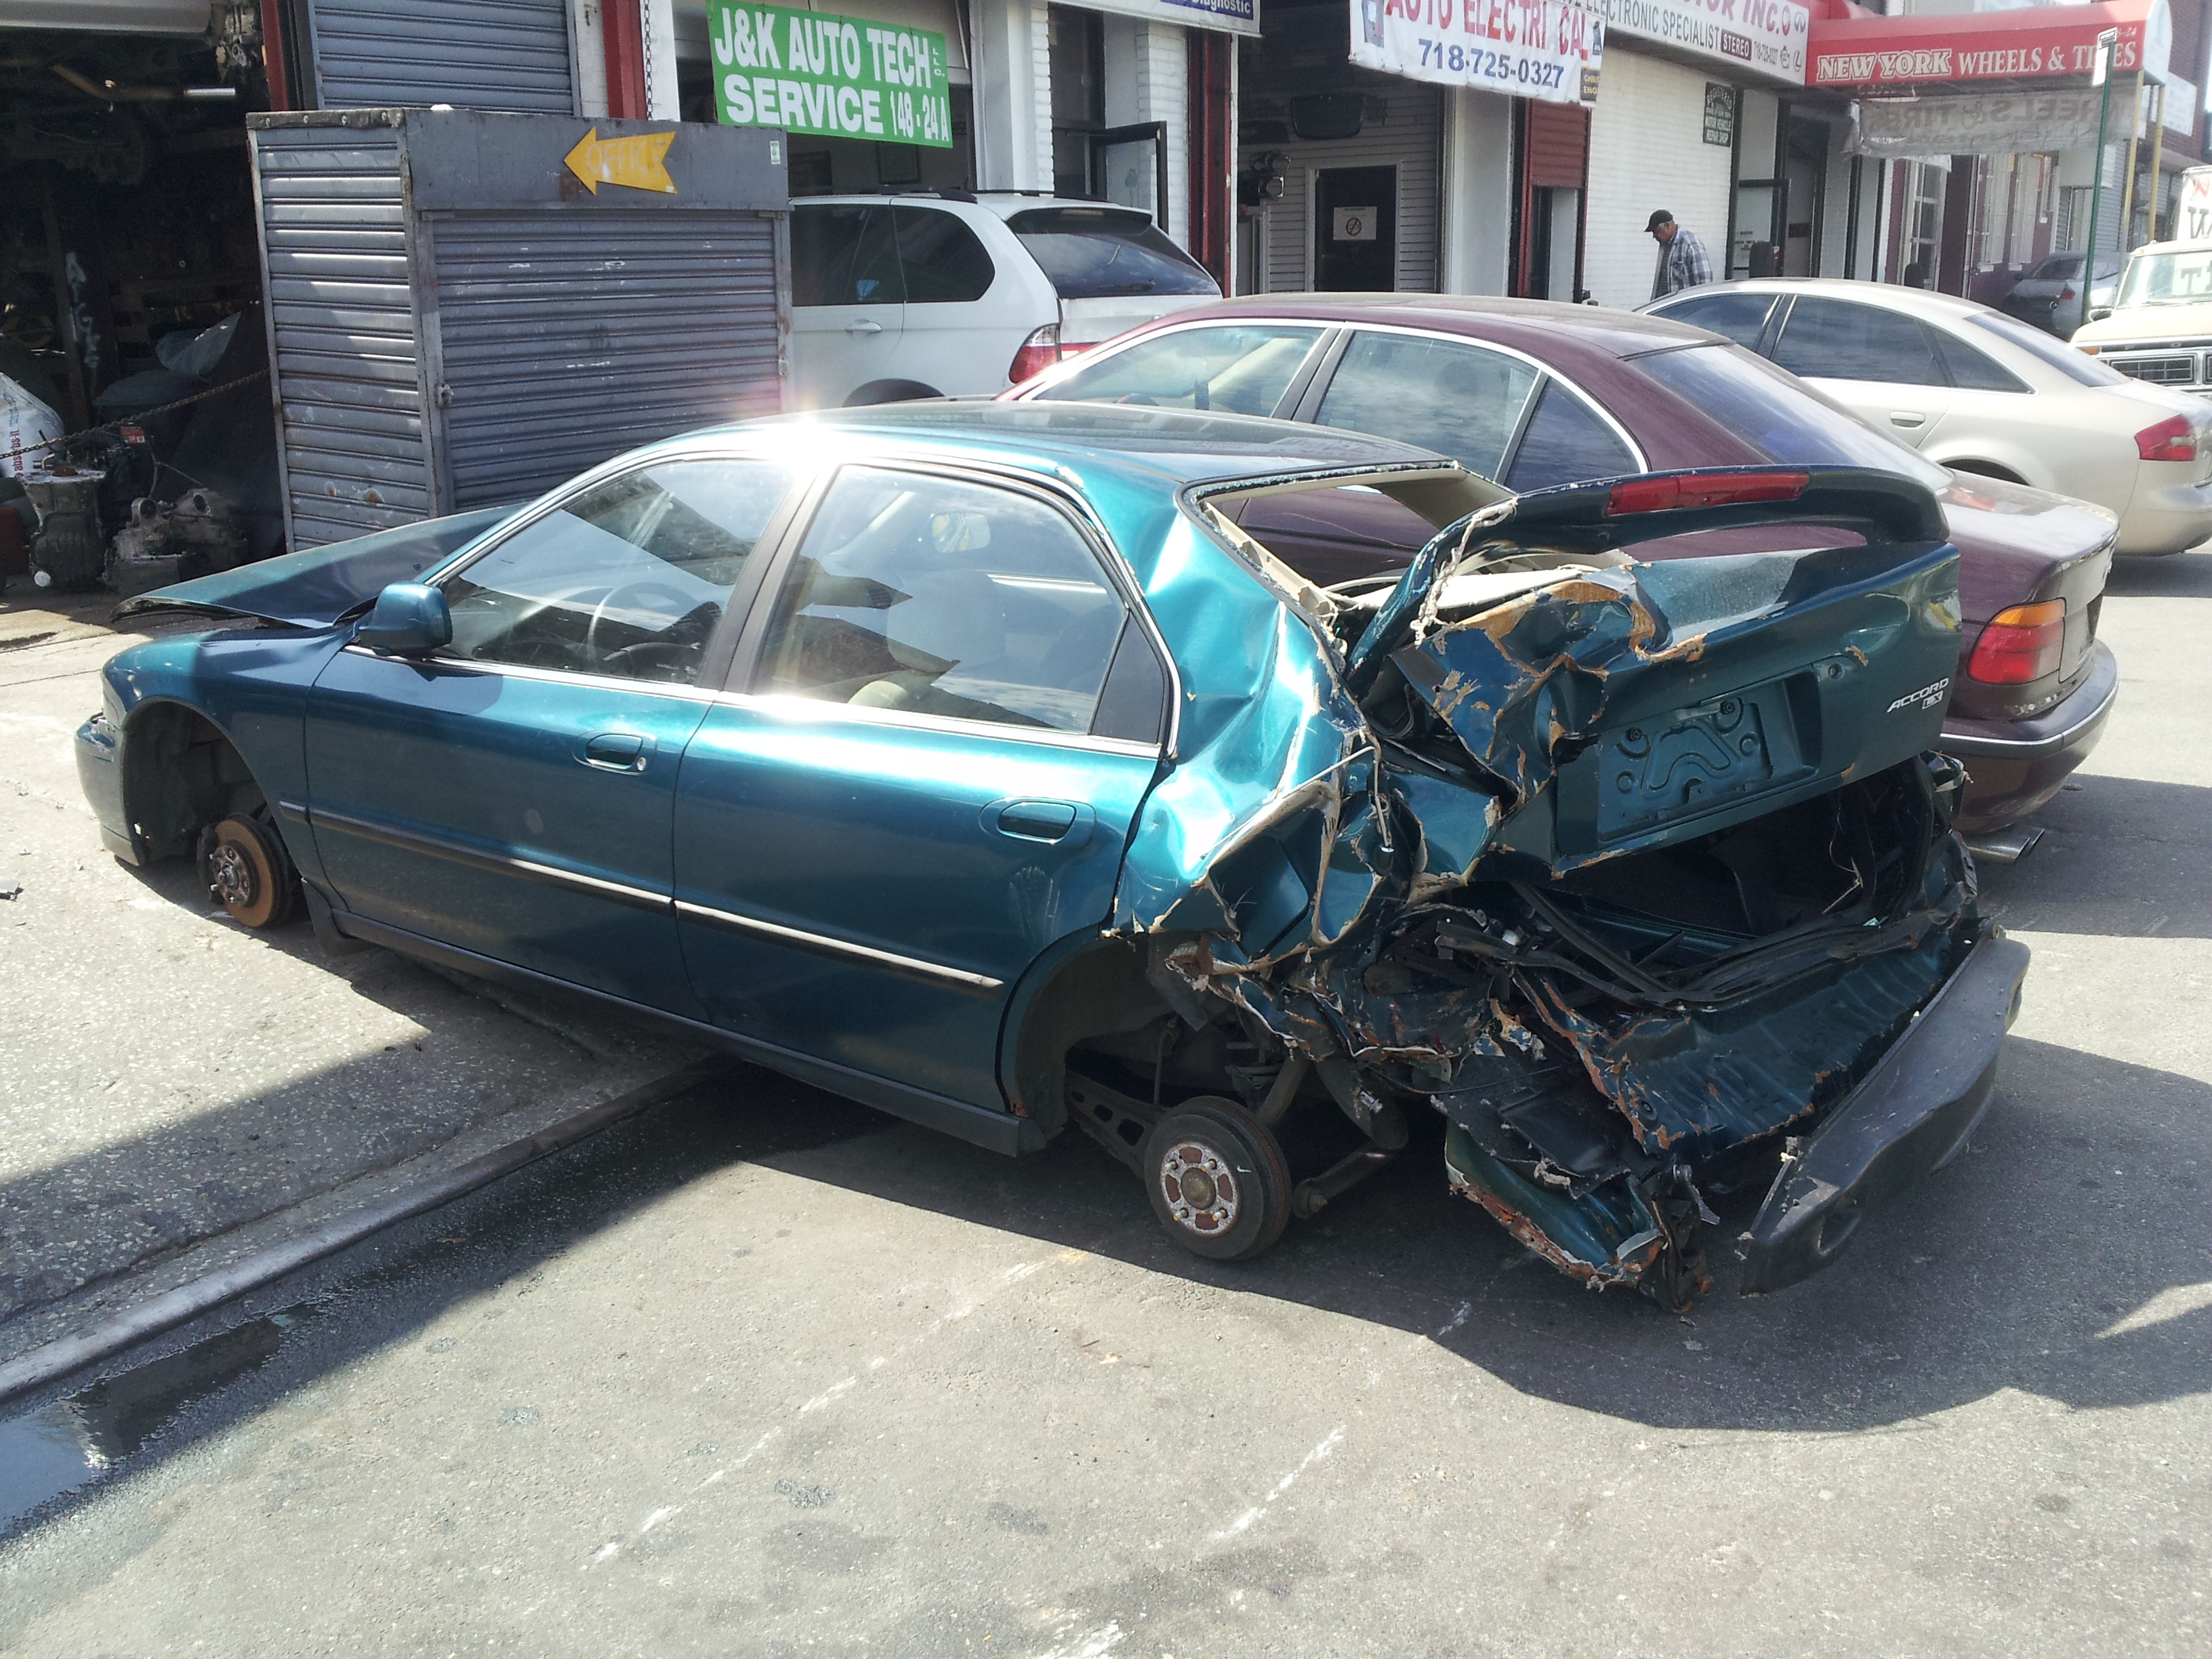 Pick Up Some Summer Cash by Junking Your Car in Queens, New York